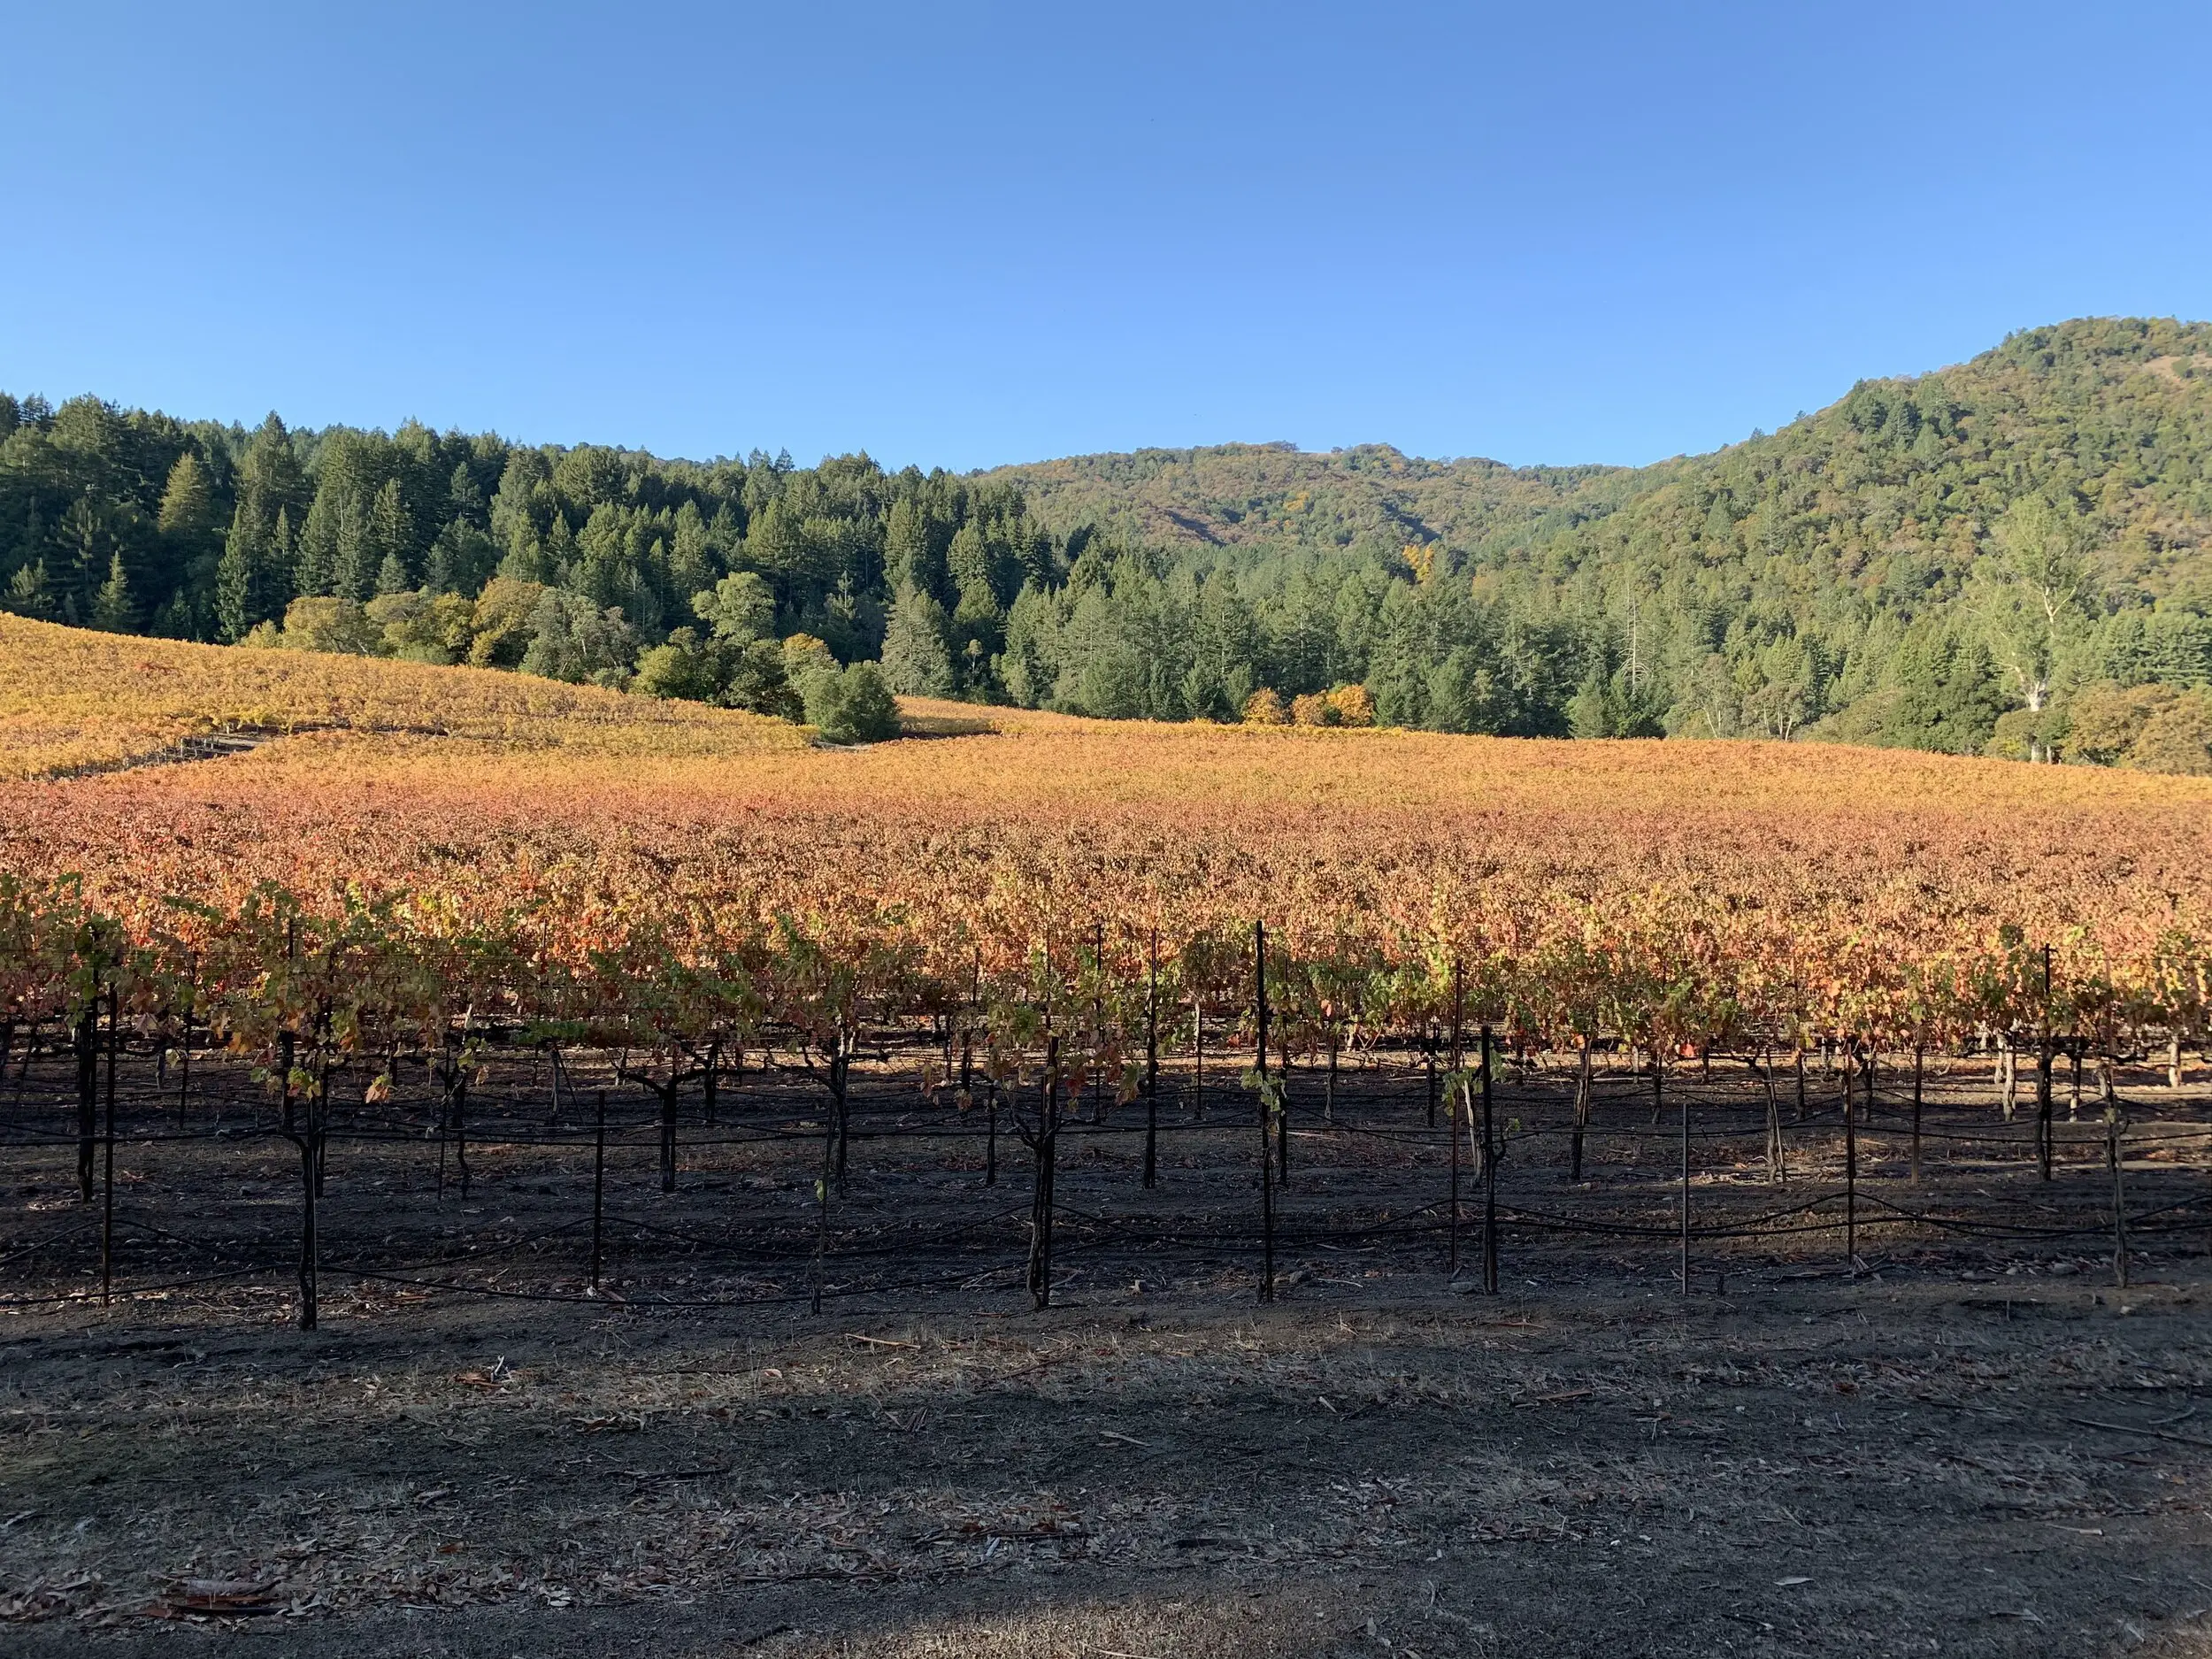 Wind currents move from the top of the hill in this vineyard down to the bottom. The red leaves on the vines at the bottom were exposed to colder temperatures than the vines with the yellow leaves higher up. Cold air got trapped as the topography fl…